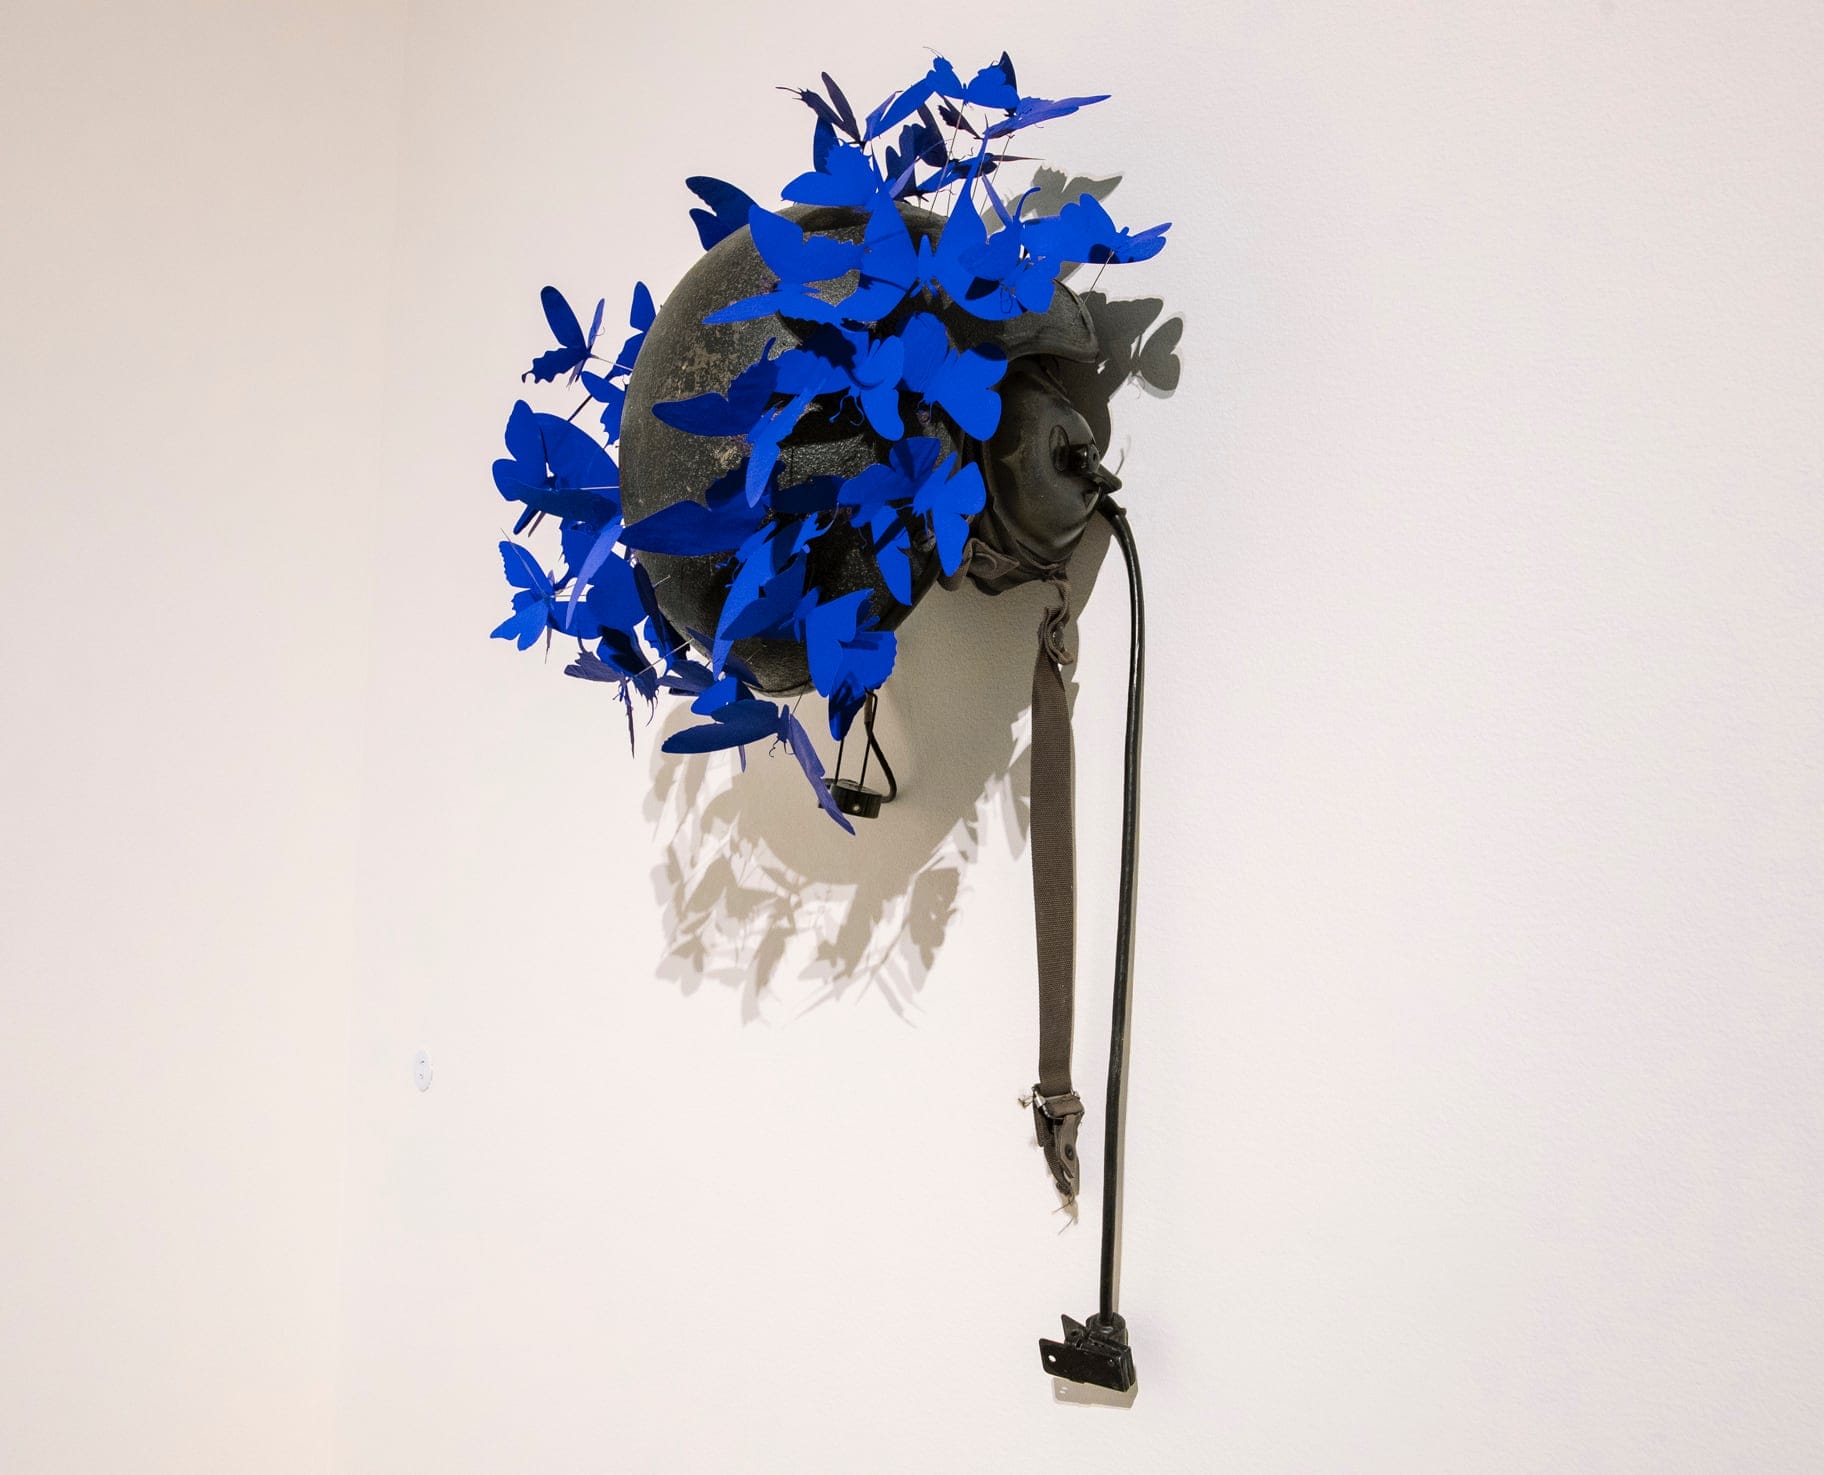 a wall sculpture of a pilot's helmet swarmed with bright blue butterflies made from aluminum